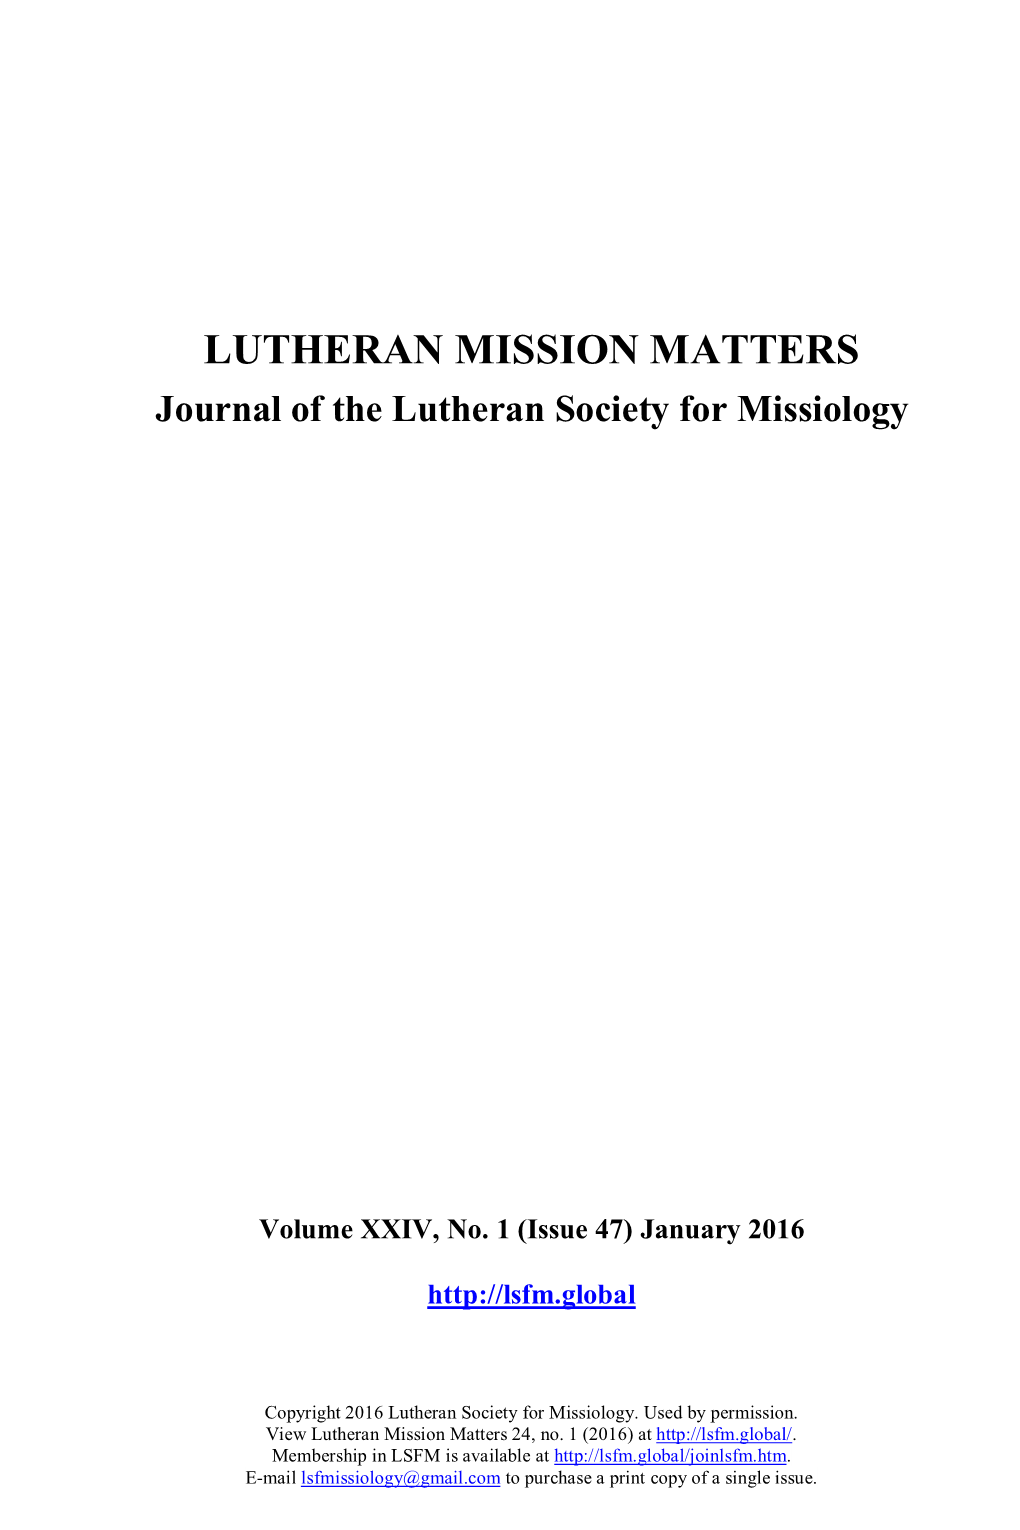 LUTHERAN MISSION MATTERS Journal of the Lutheran Society for Missiology